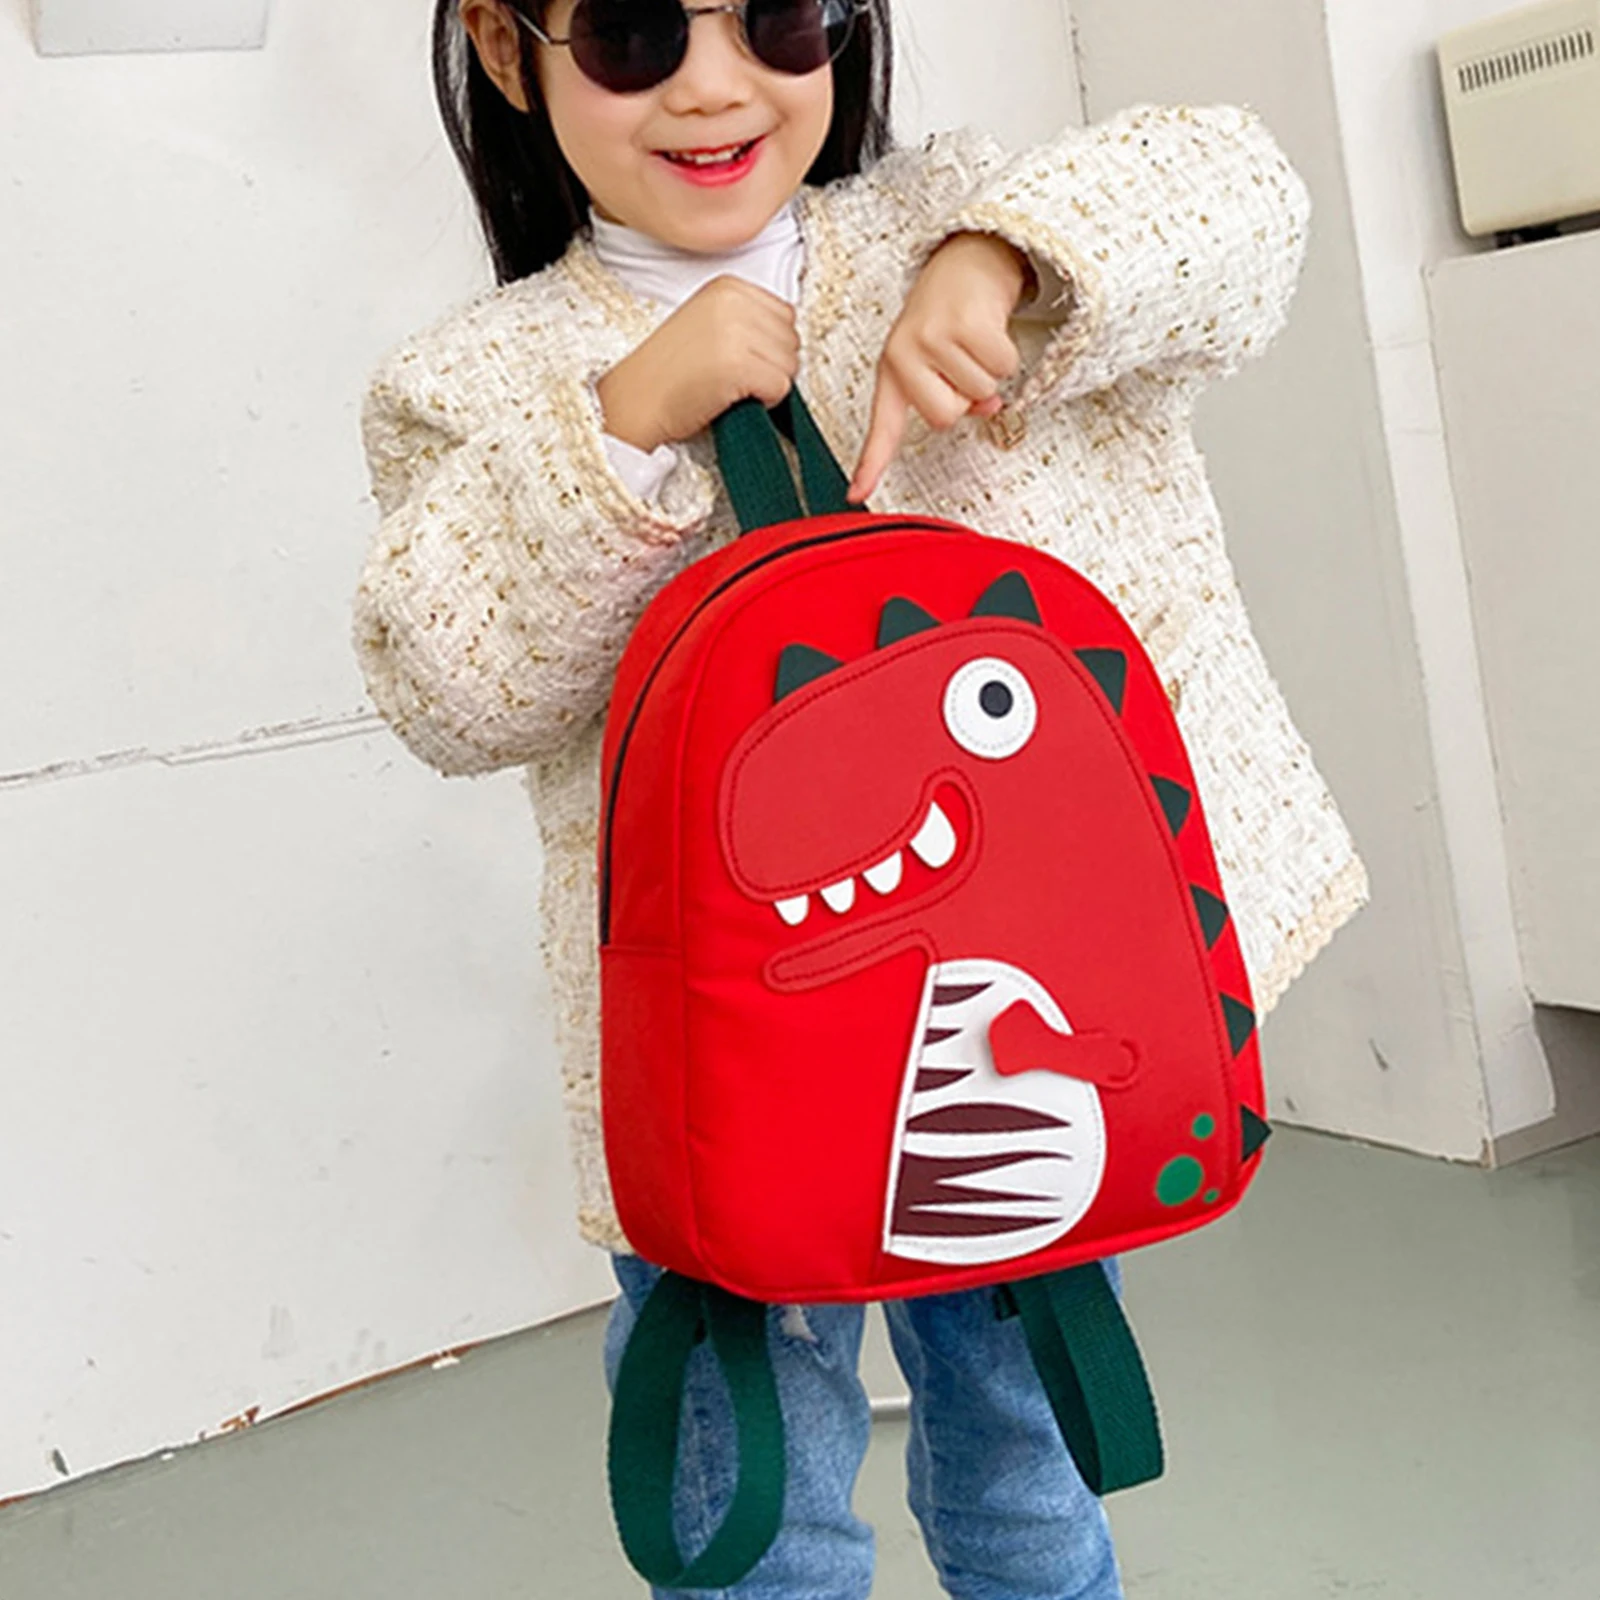 Cute Backpack for Girls Boys Cute Bags for Kids Durable and Comfortable